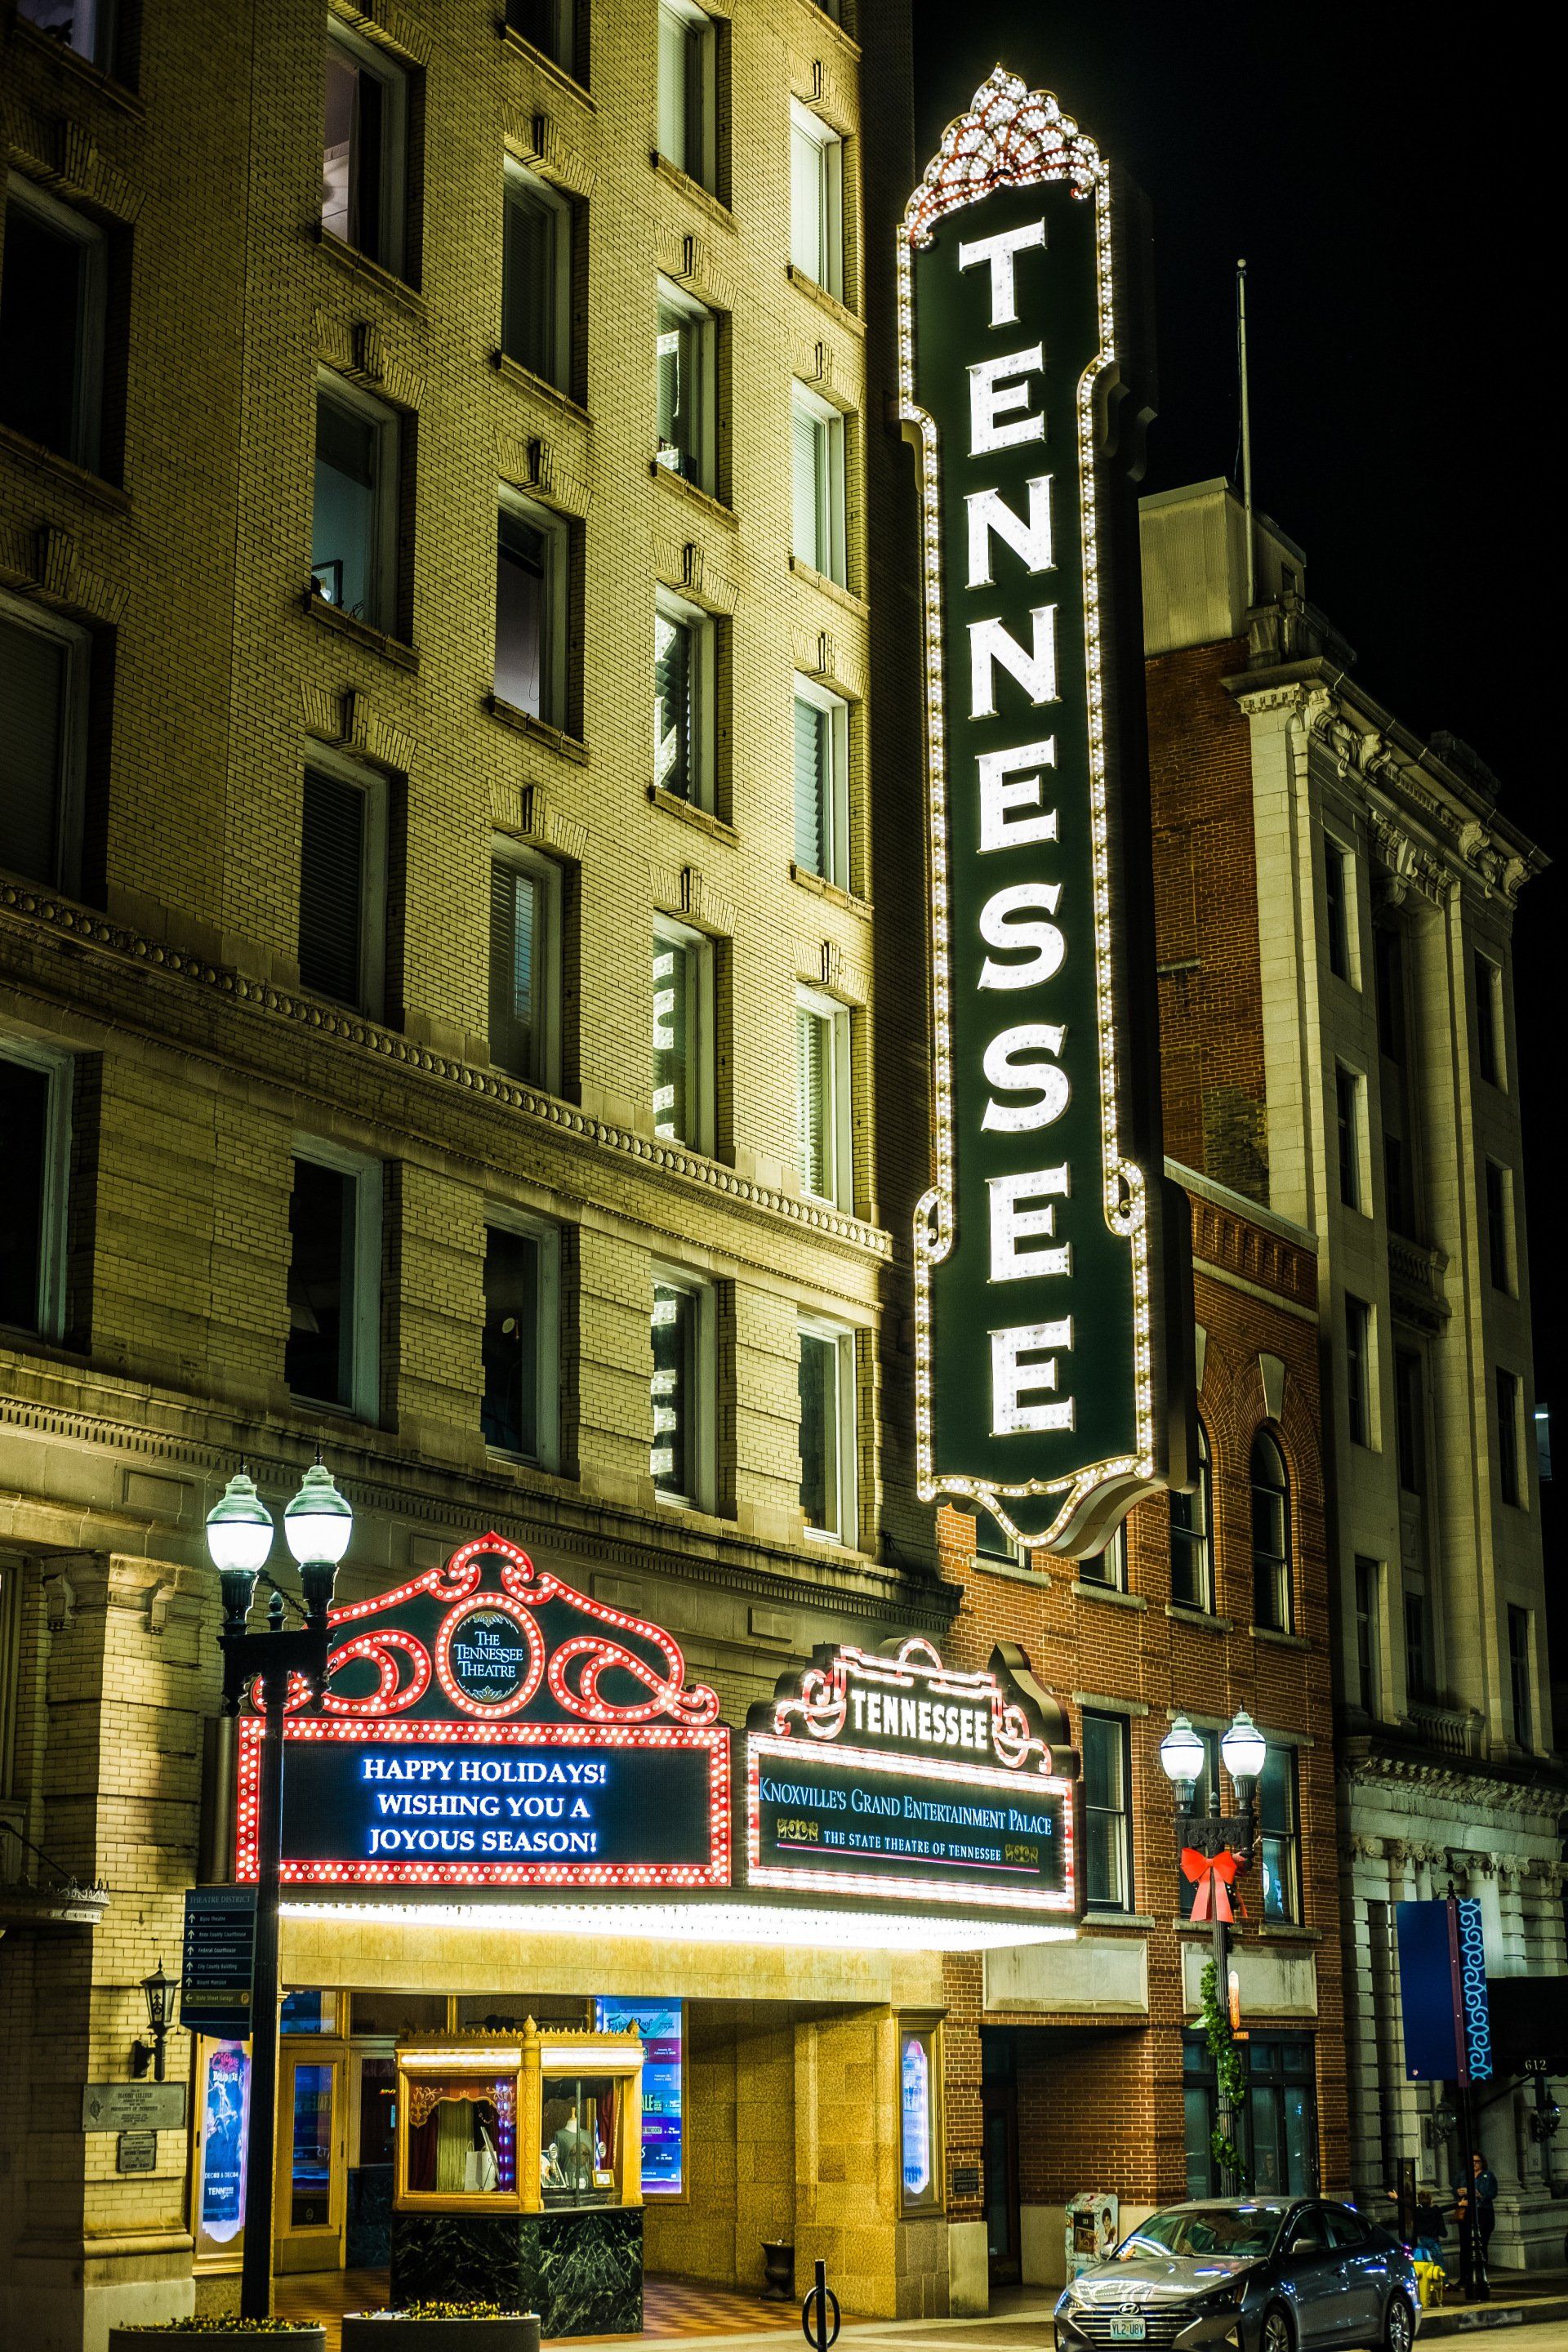 The tennessee theater is lit up at night